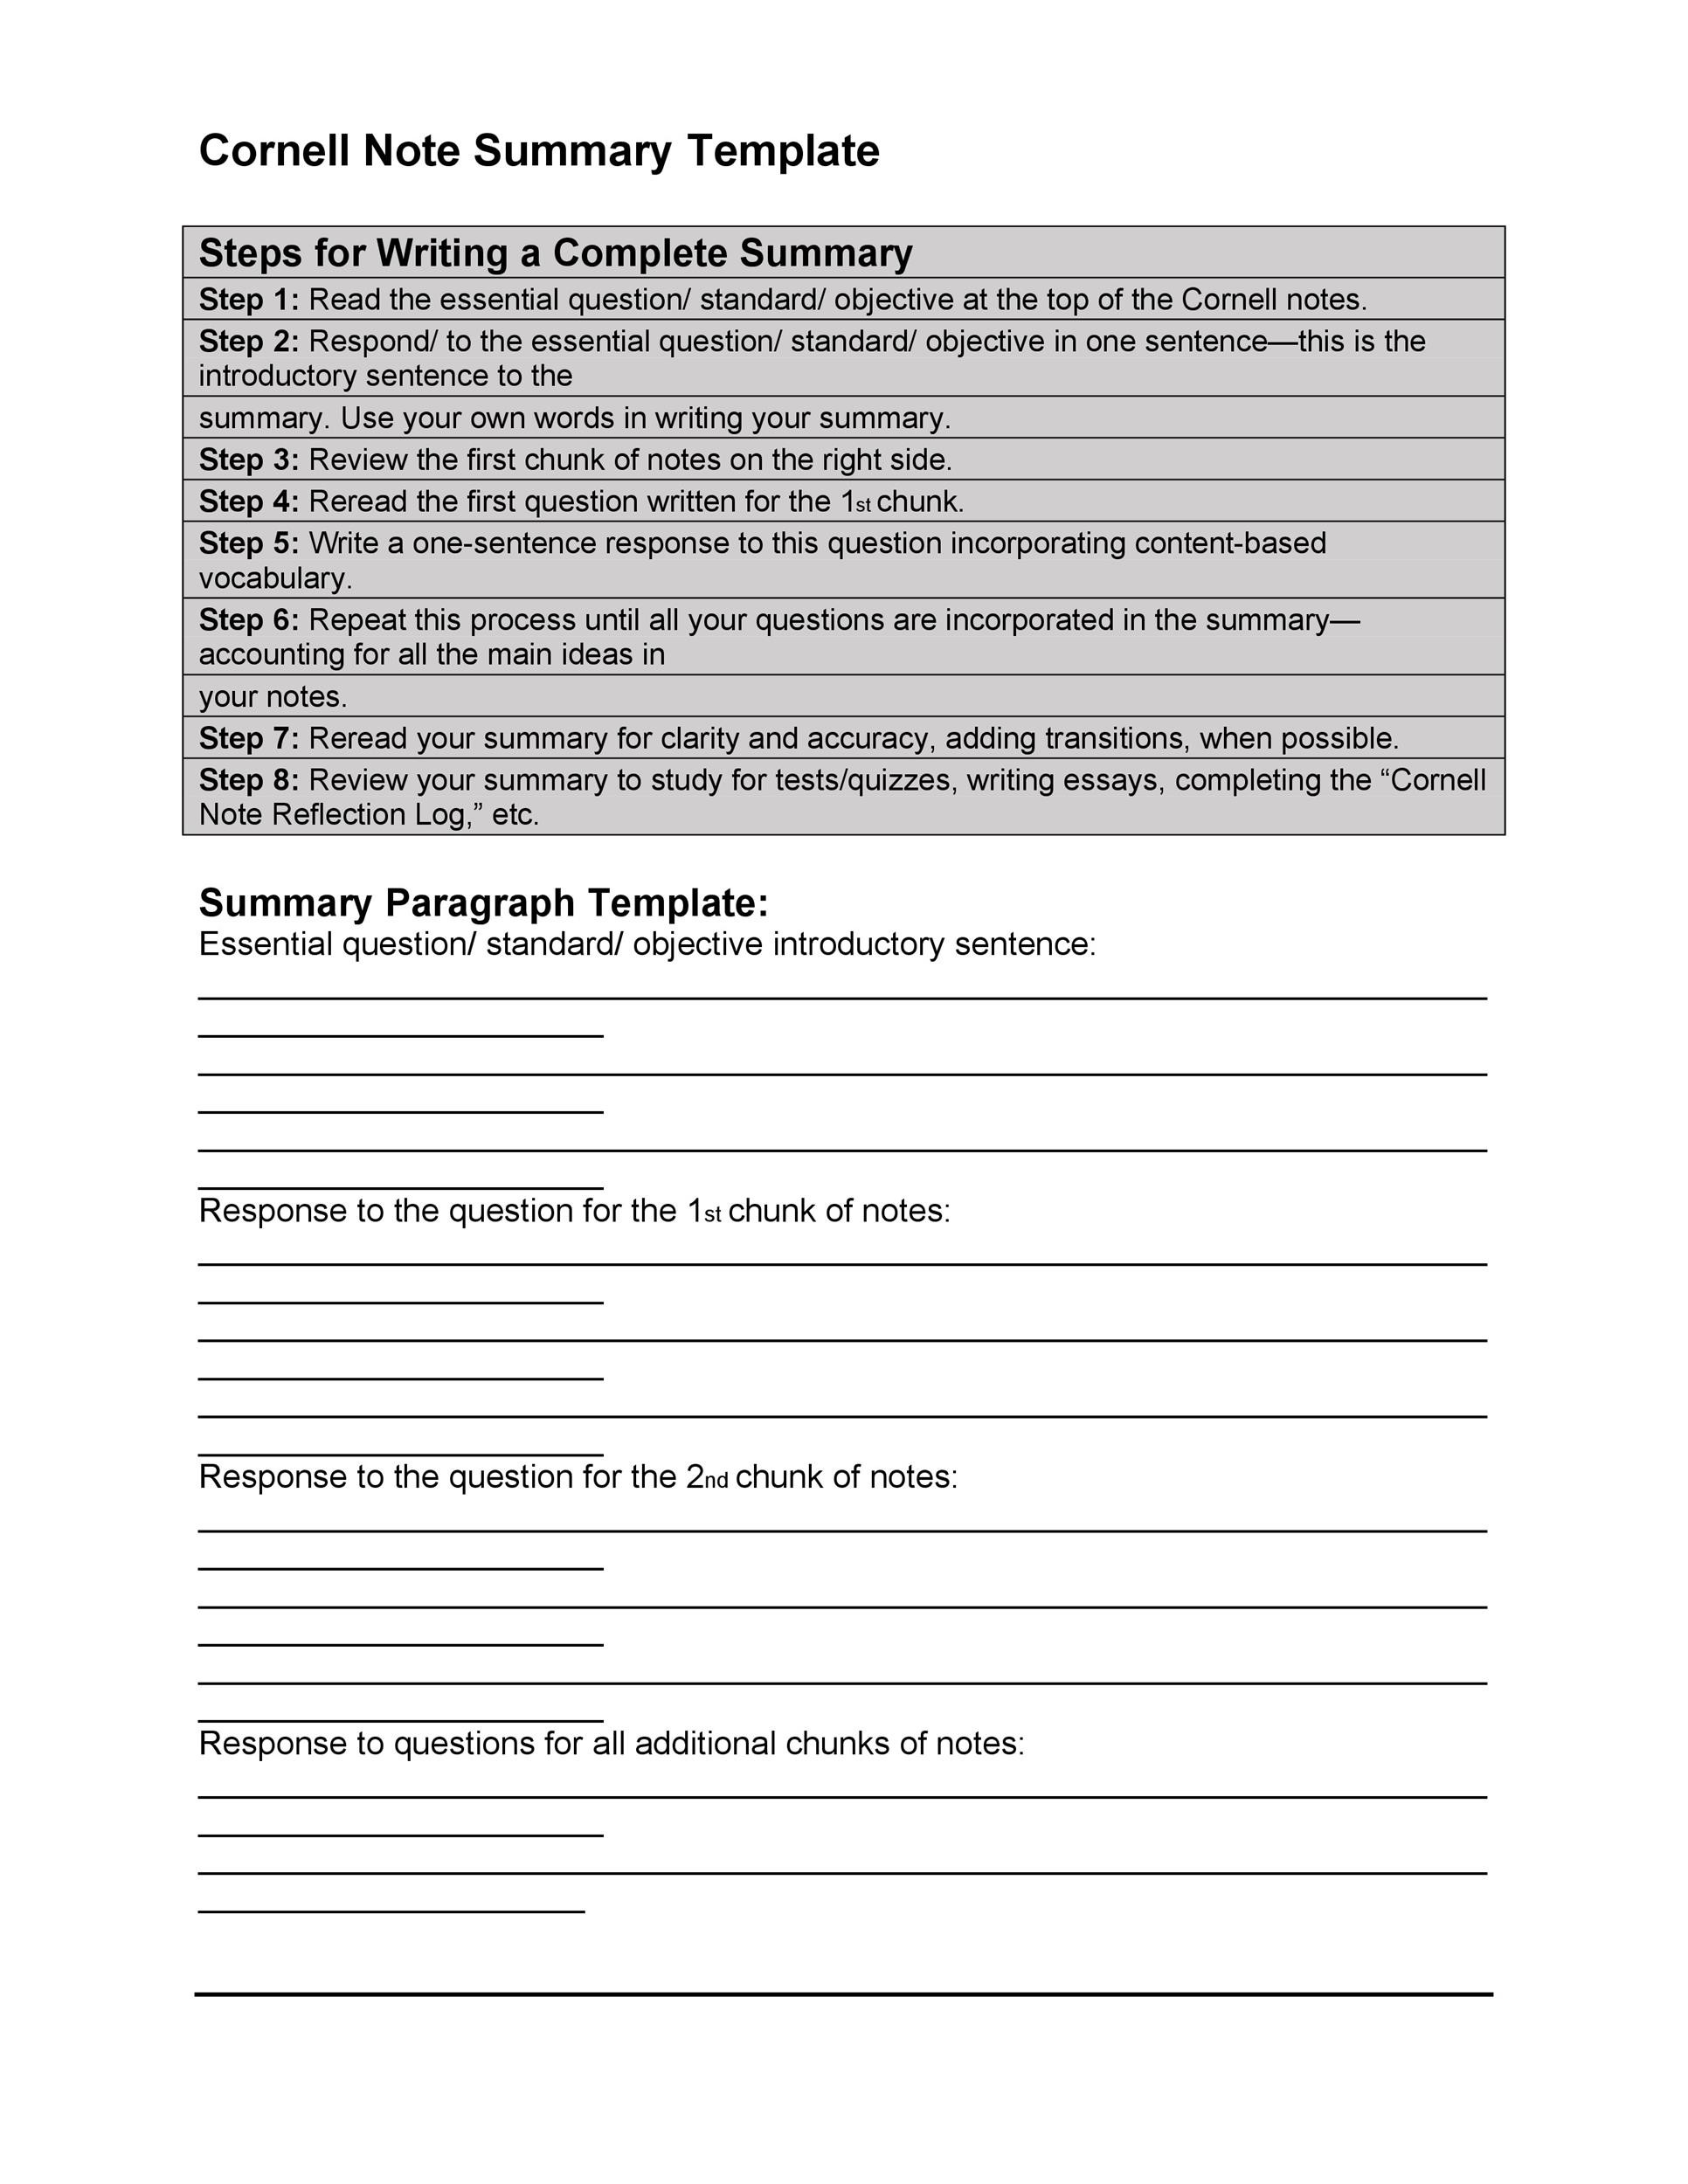 Free Cornell Notes Template 09